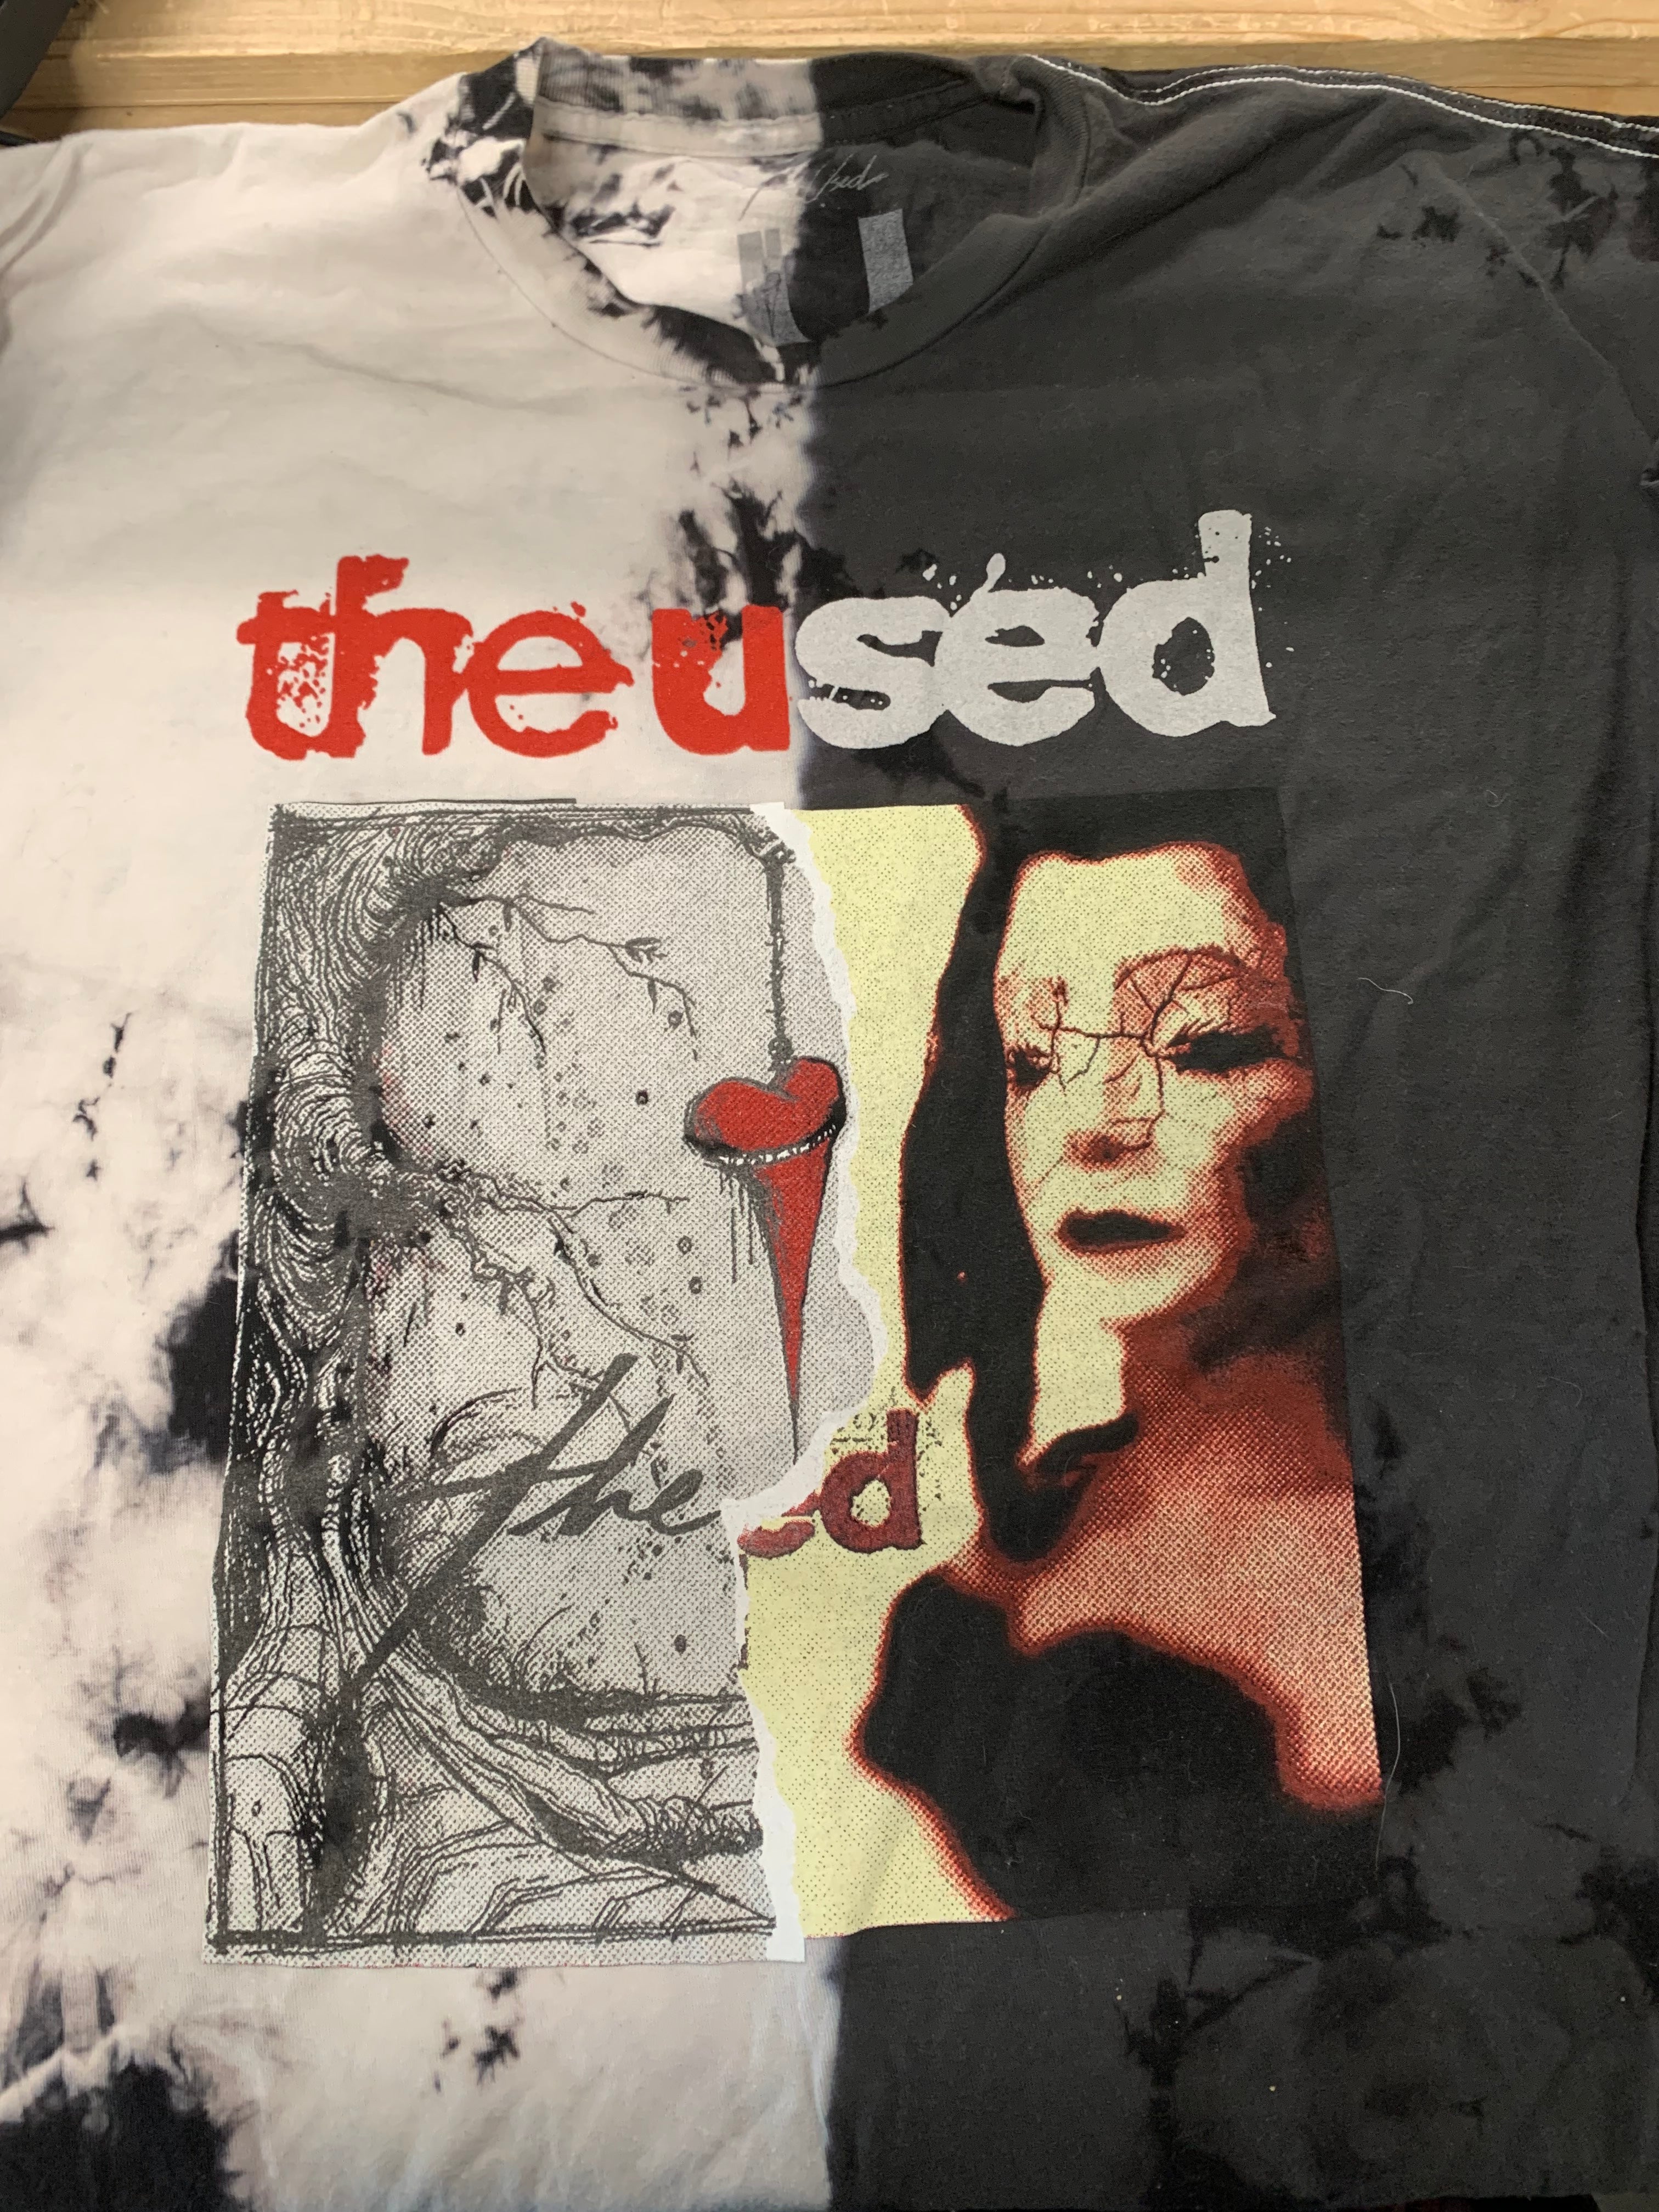 The Used Self Titled / In Love And Death T-Shirt, White / Black Split Dye, XL